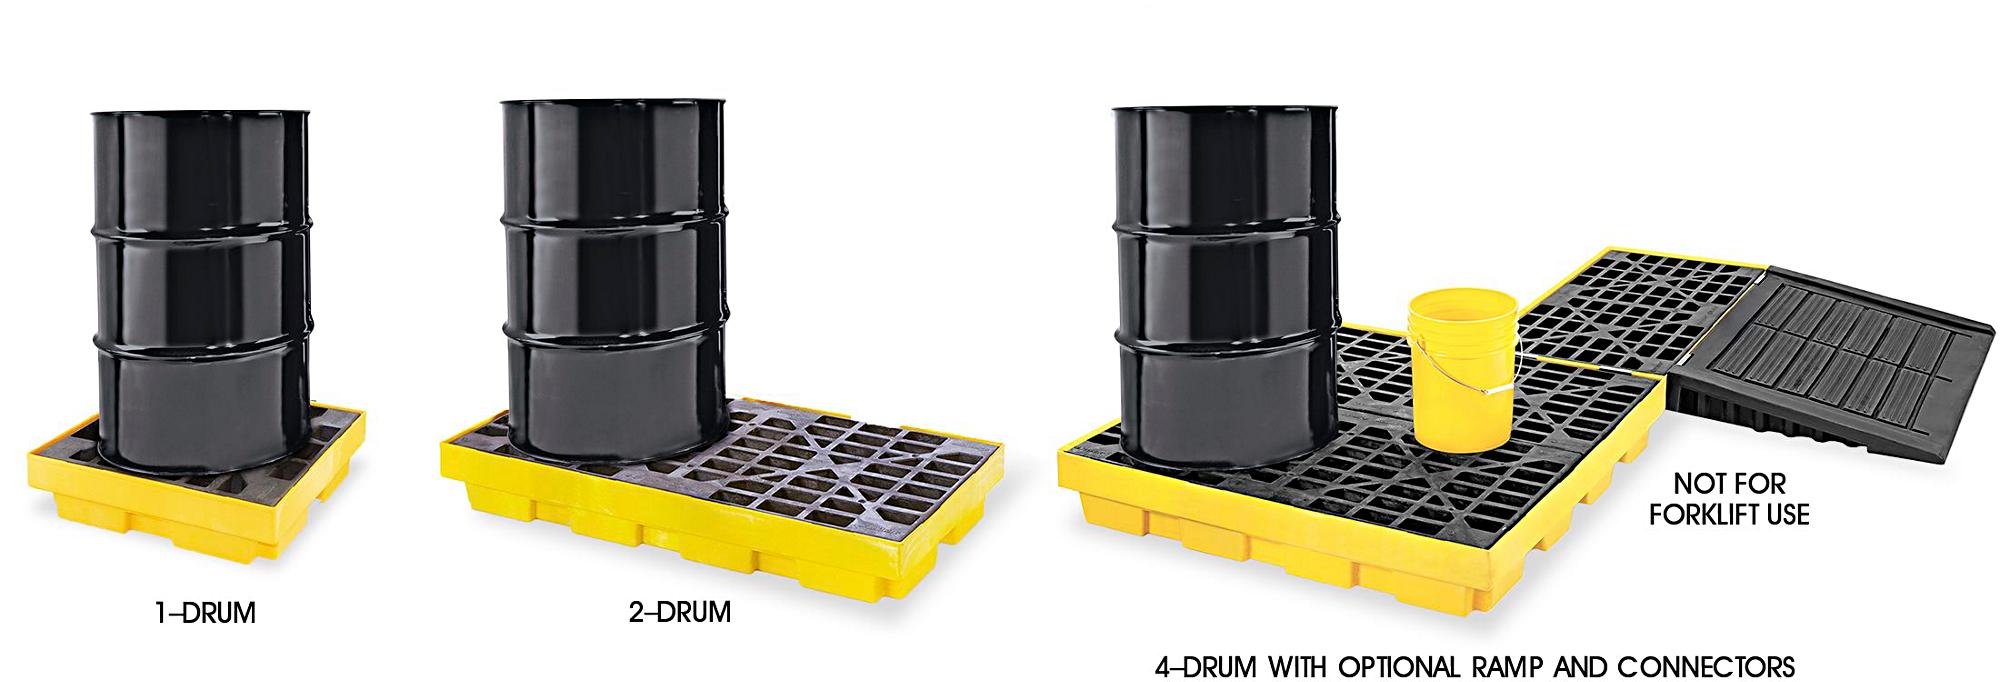 Spill Containment Workstations